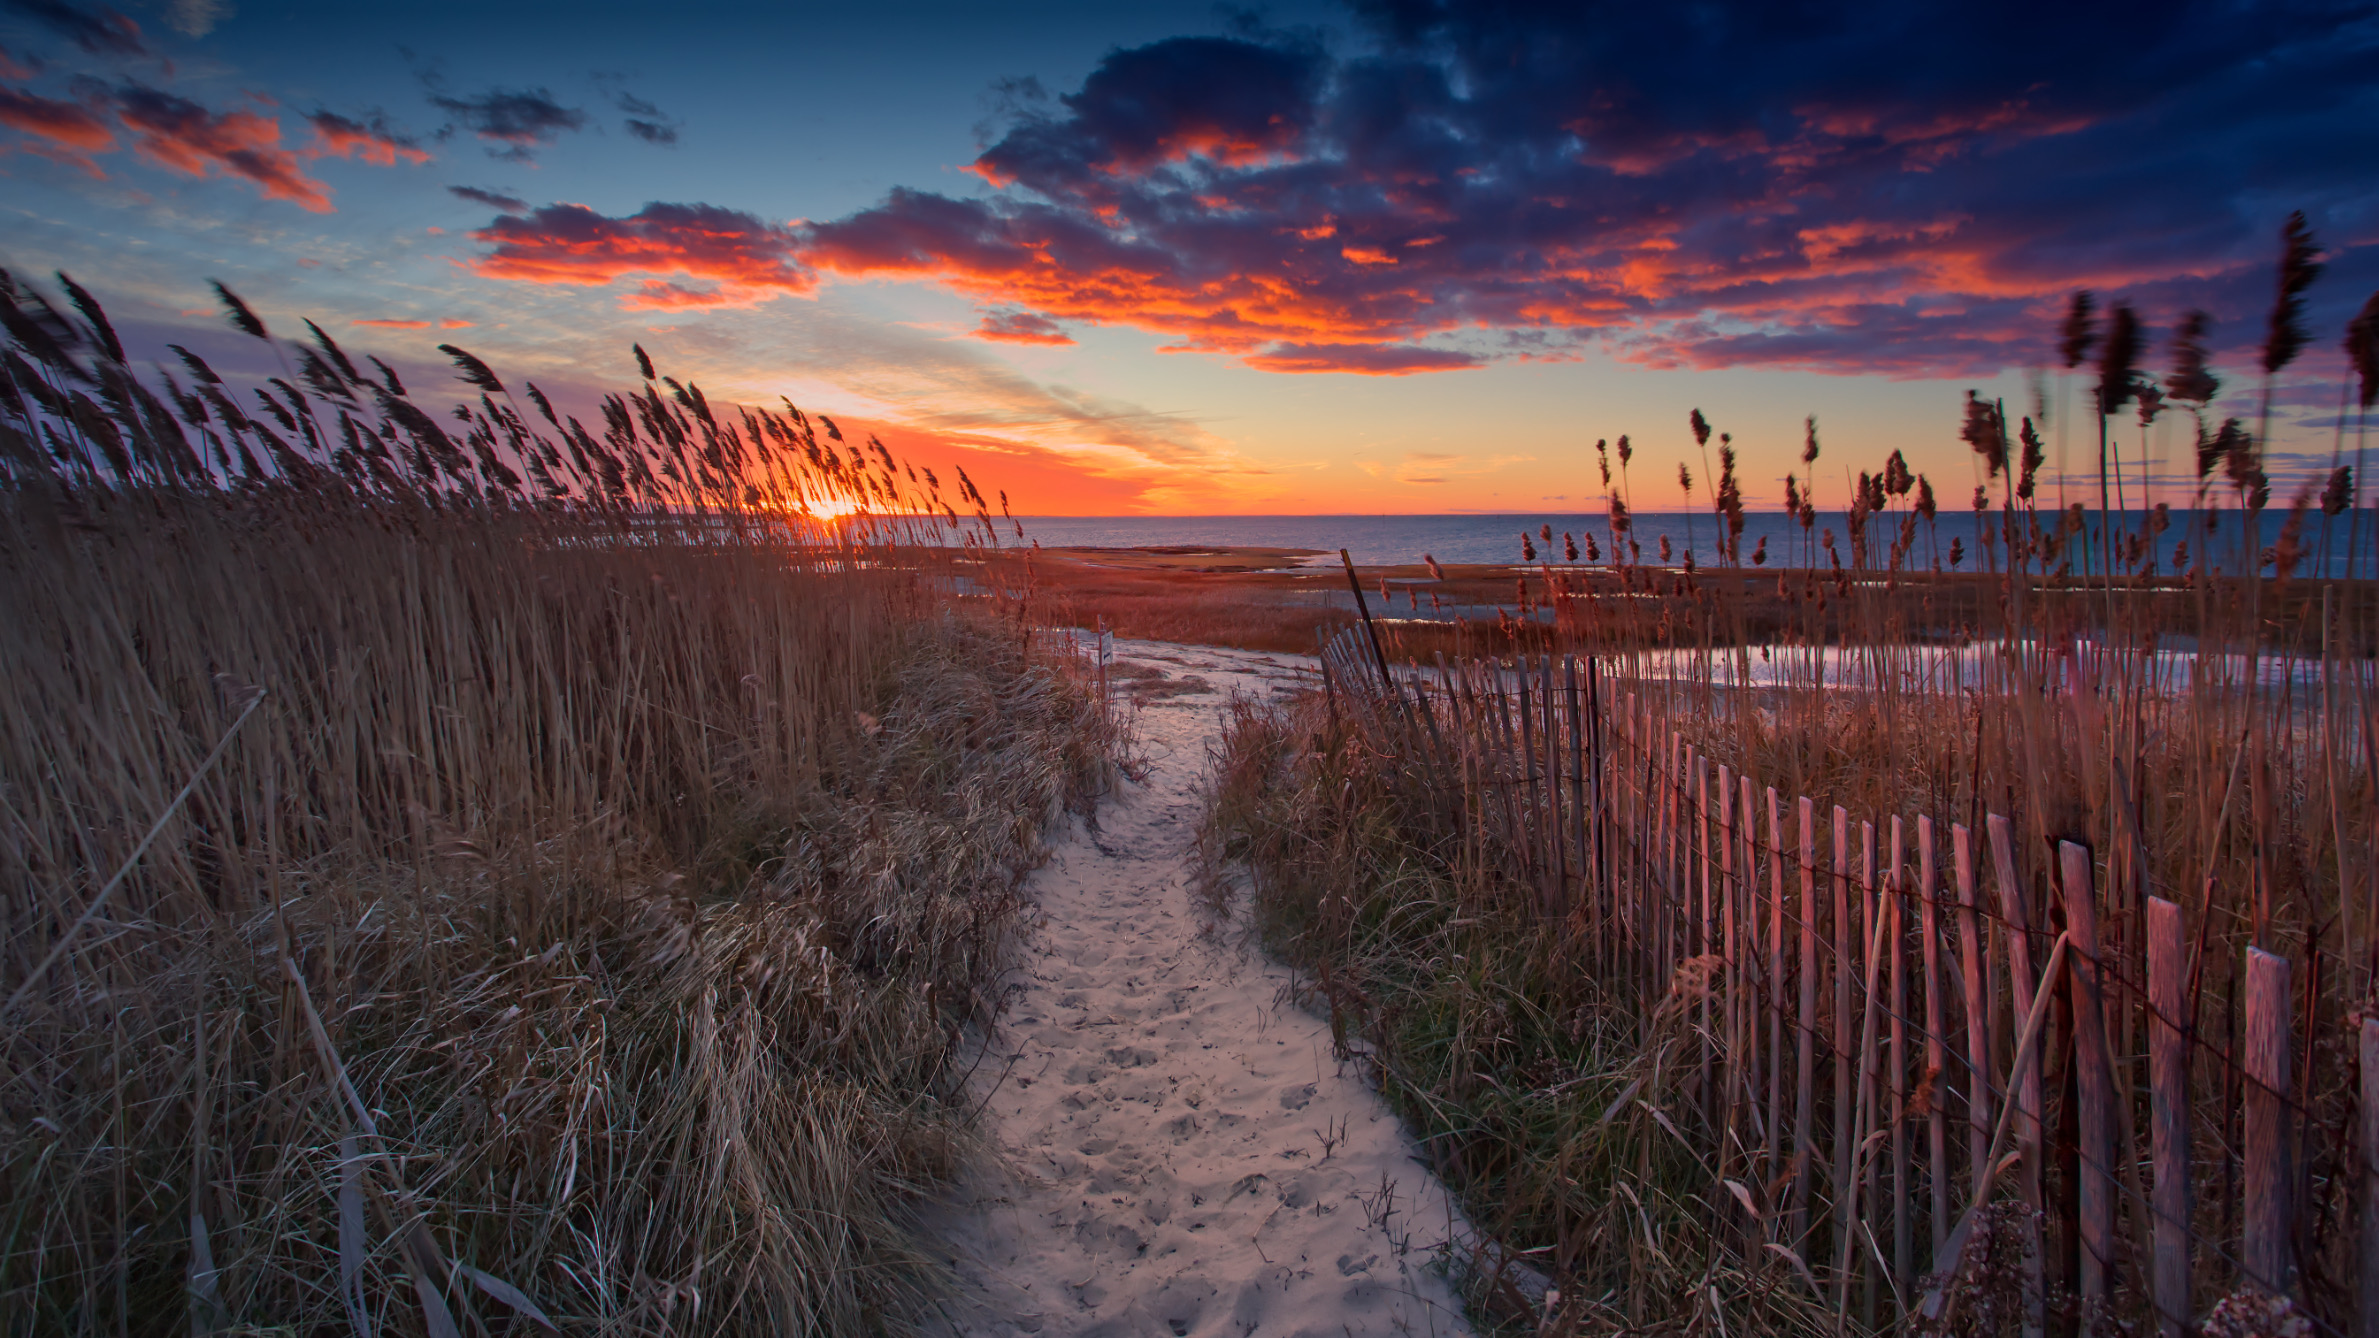 Bring the beauty of Cape Cod's picturesque coastline into your home with this stunning beach sunset and fence art print. Professionally printed on high-quality paper using archival inks, this art print will last for years to come. Perfect for beach lovers and art enthusiasts, our beach art prints are carefully inspected and packaged to ensure they arrive in perfect condition. Shop now and add a touch of tranquility and serenity to your living space with this captivating piece of coastal art.